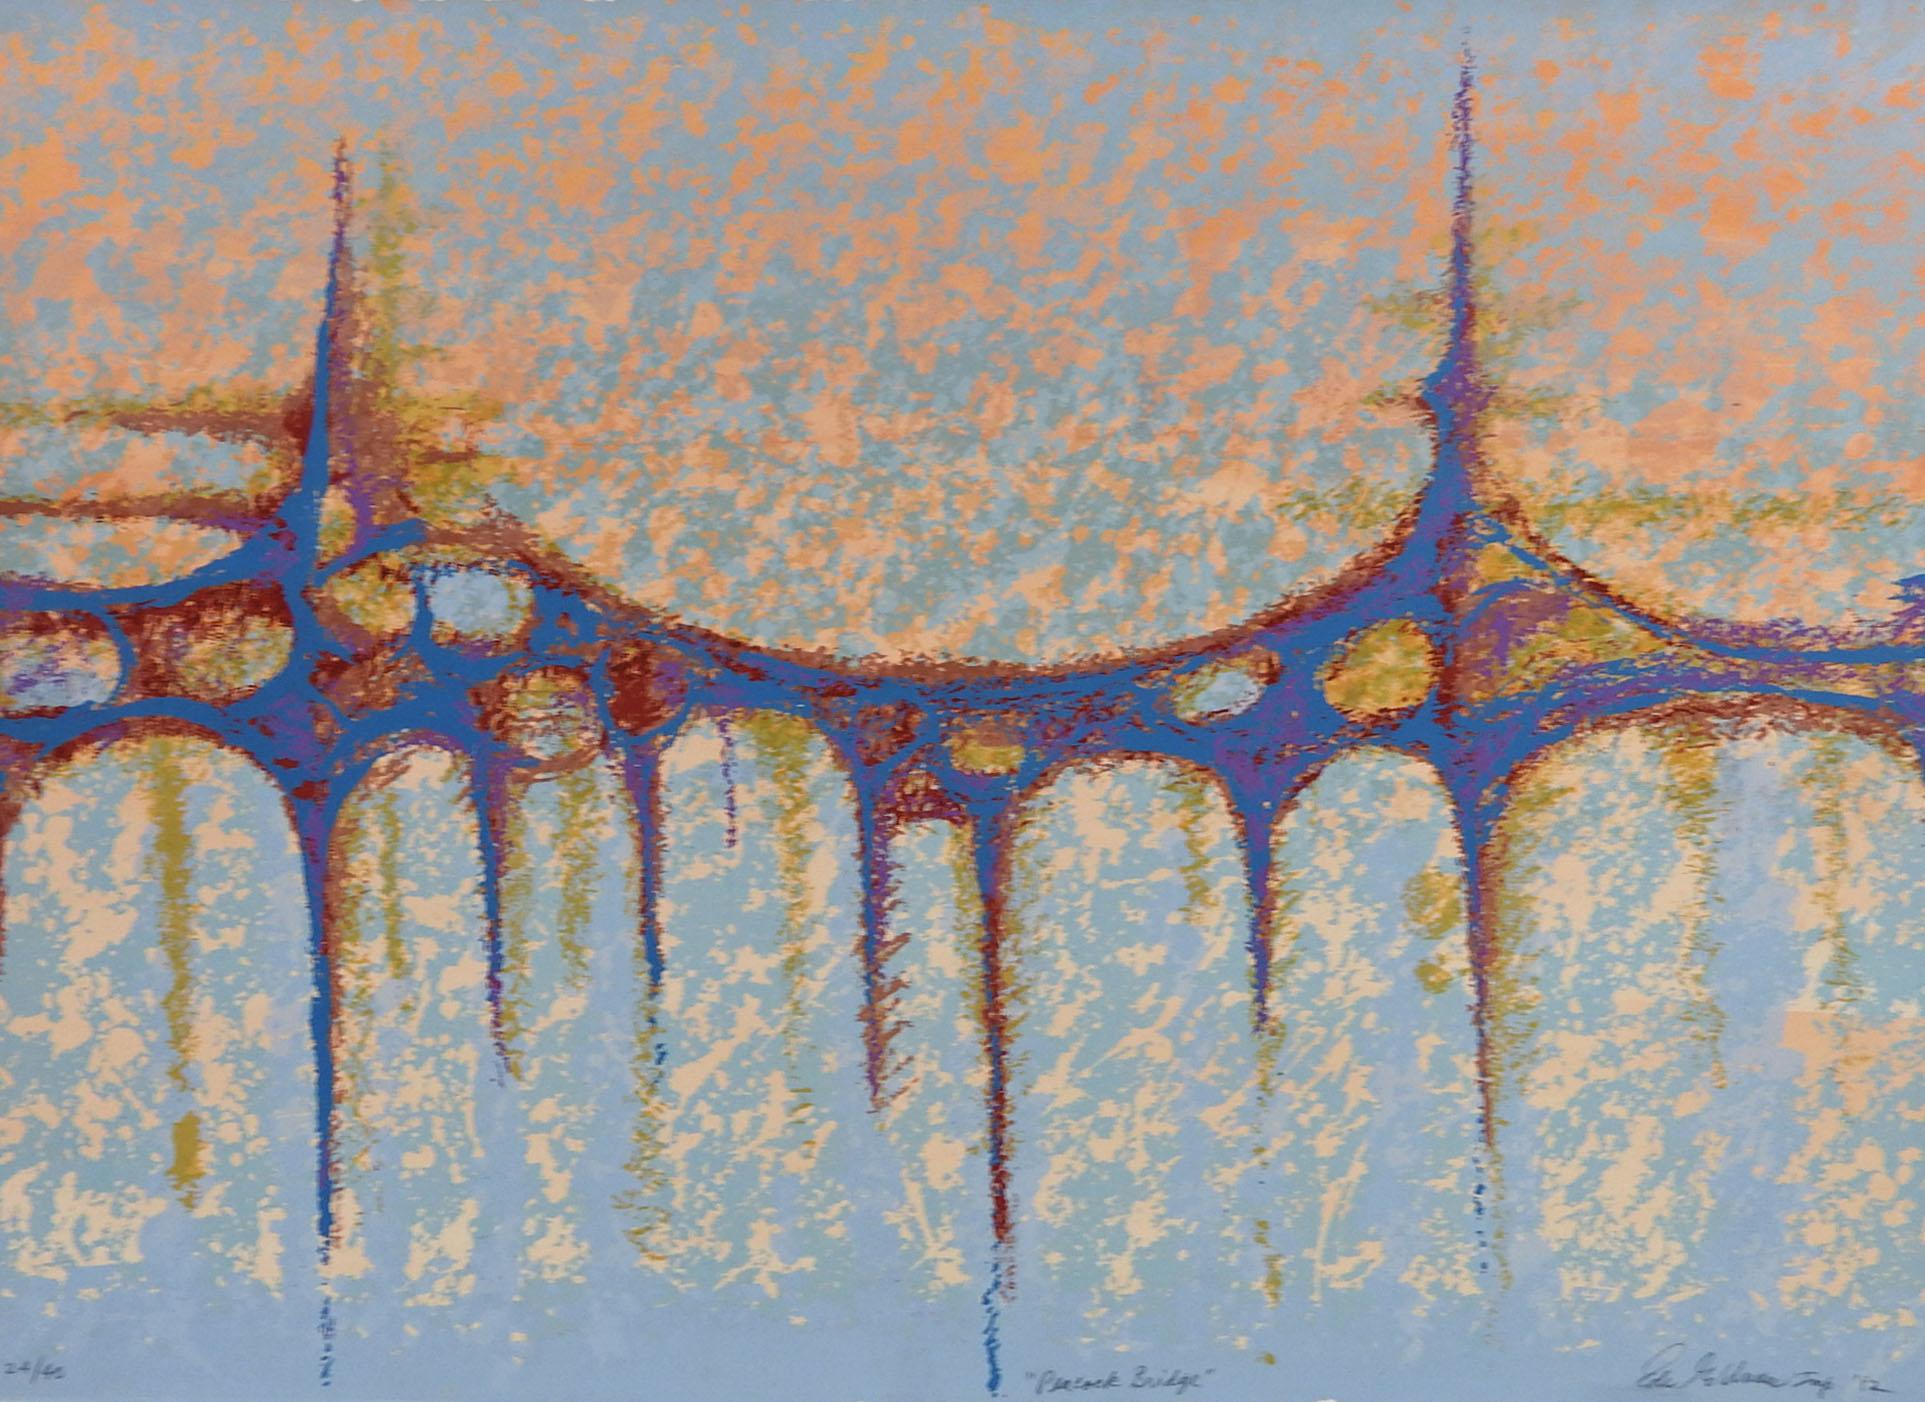 Abstract Mid-20th Century Peacock Bridge Serigraph In Good Condition For Sale In Seguin, TX